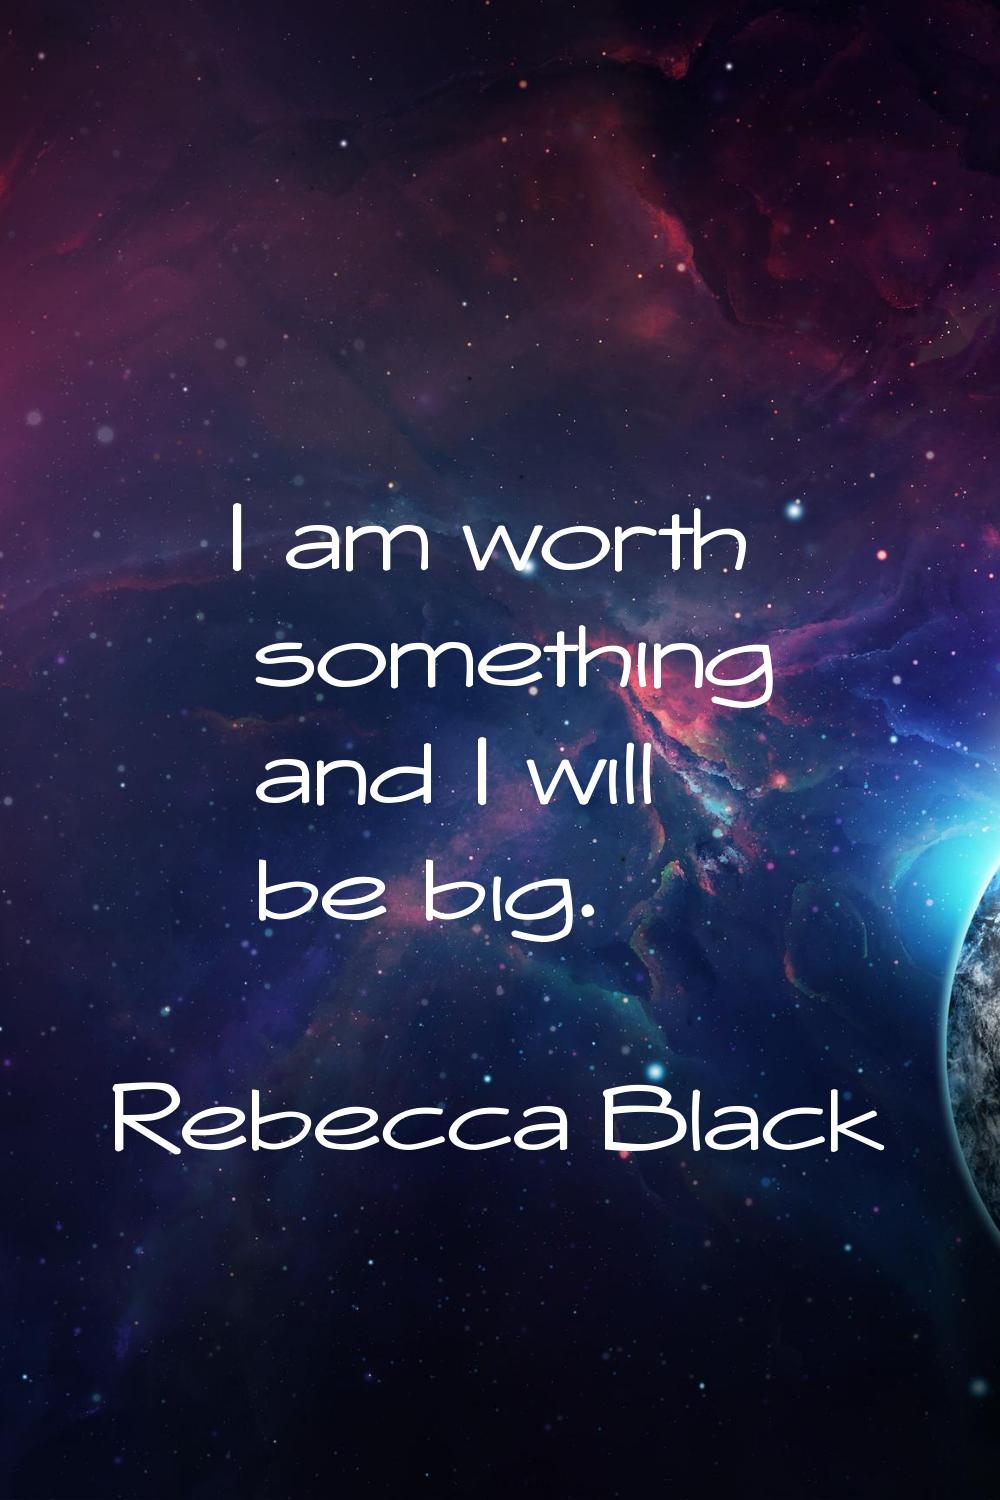 I am worth something and I will be big.